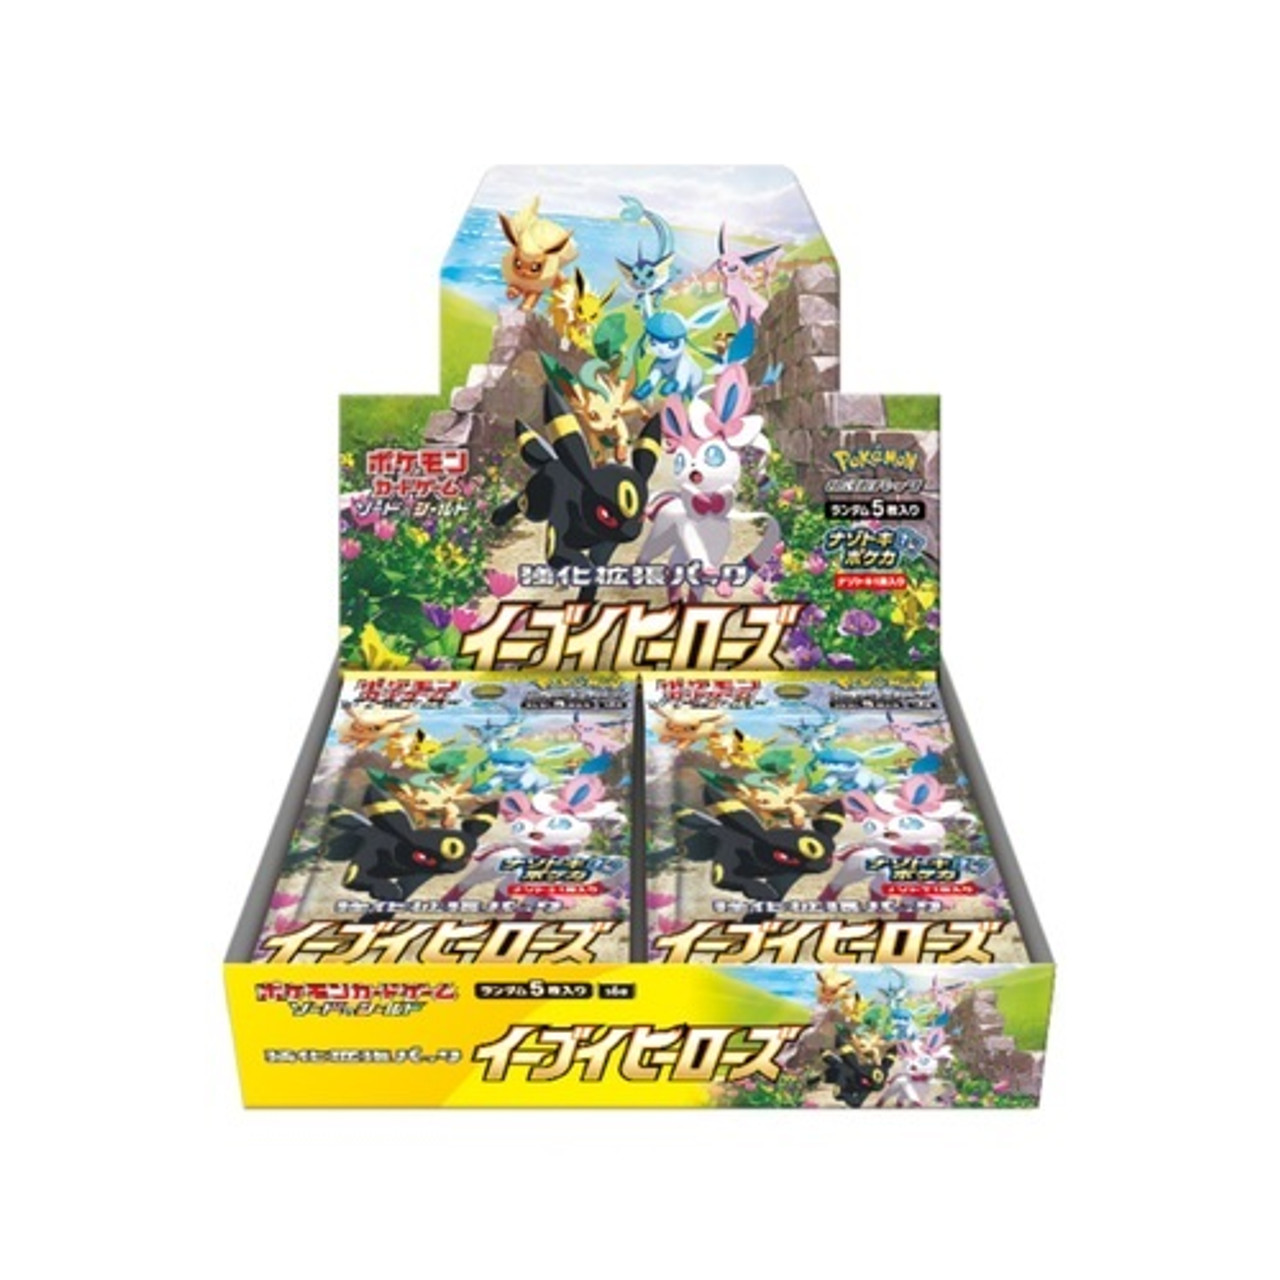 Pokemon Card Game Sword & Shield S6a Eevee Heroes Booster Pack BOX